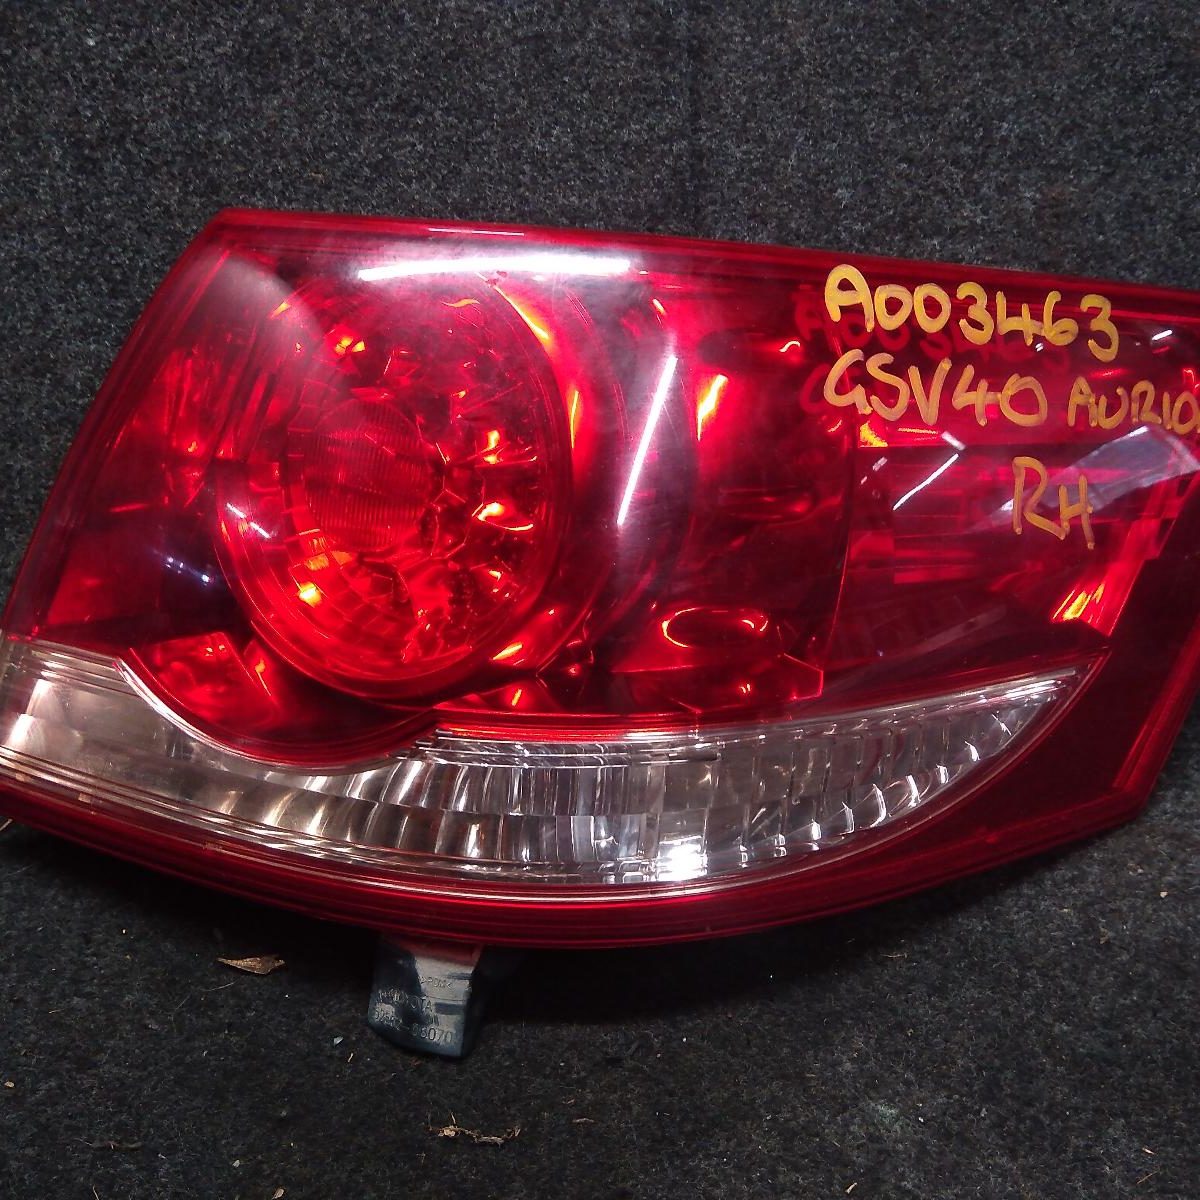 2007 TOYOTA AURION RIGHT TAILLIGHT